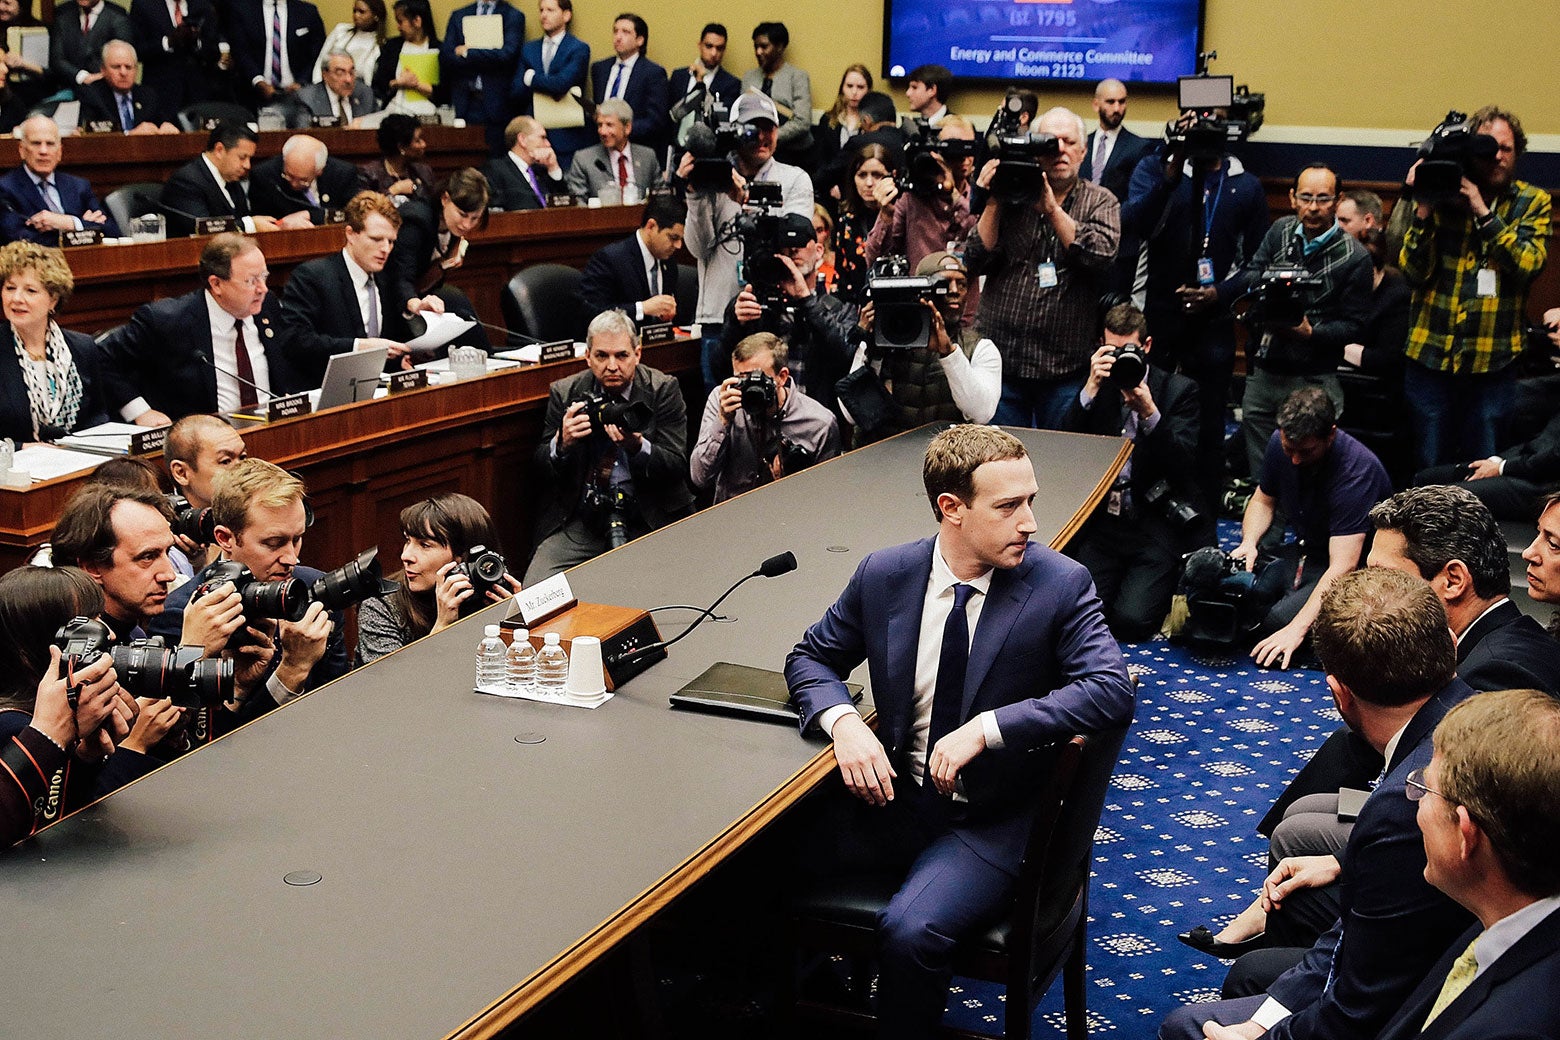 Mark Zuckerberg turns to face the gallery before testifying on Capitol Hill on April 11.